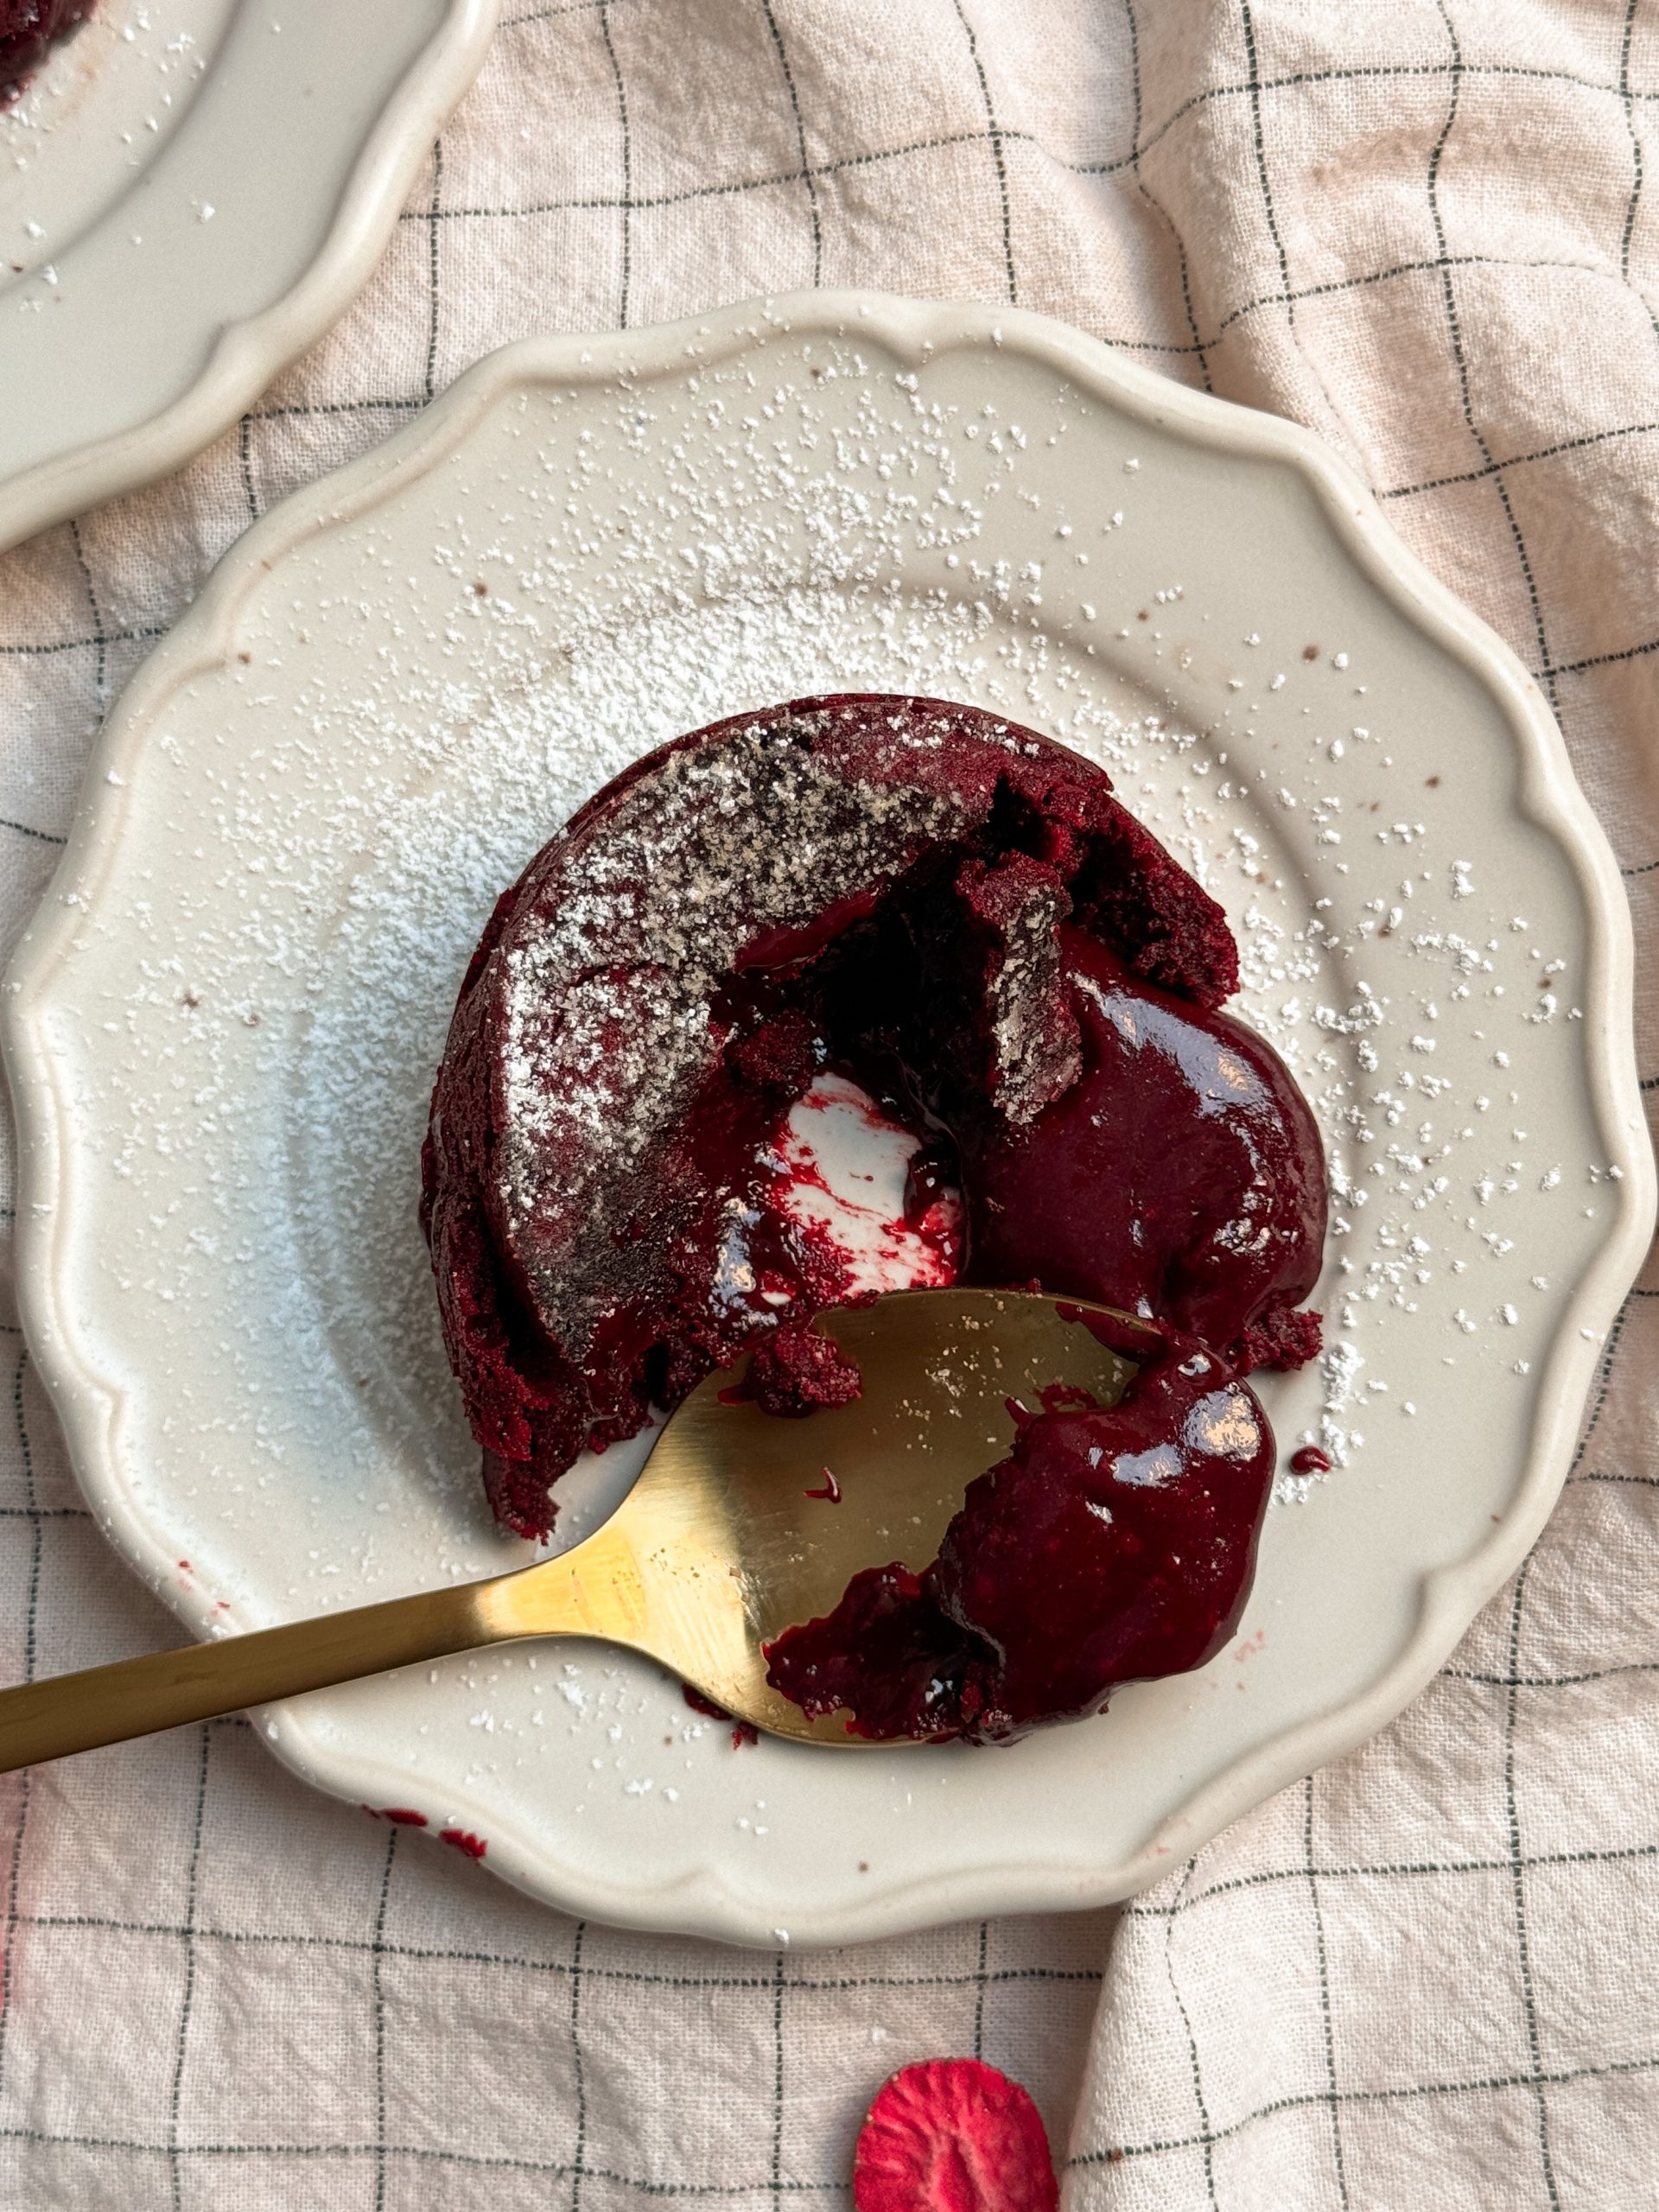 red velvet molten lava cake on a small plate. cake is half eaten and the molten center is oozing out, and a spoon is taking a bite out of the cake